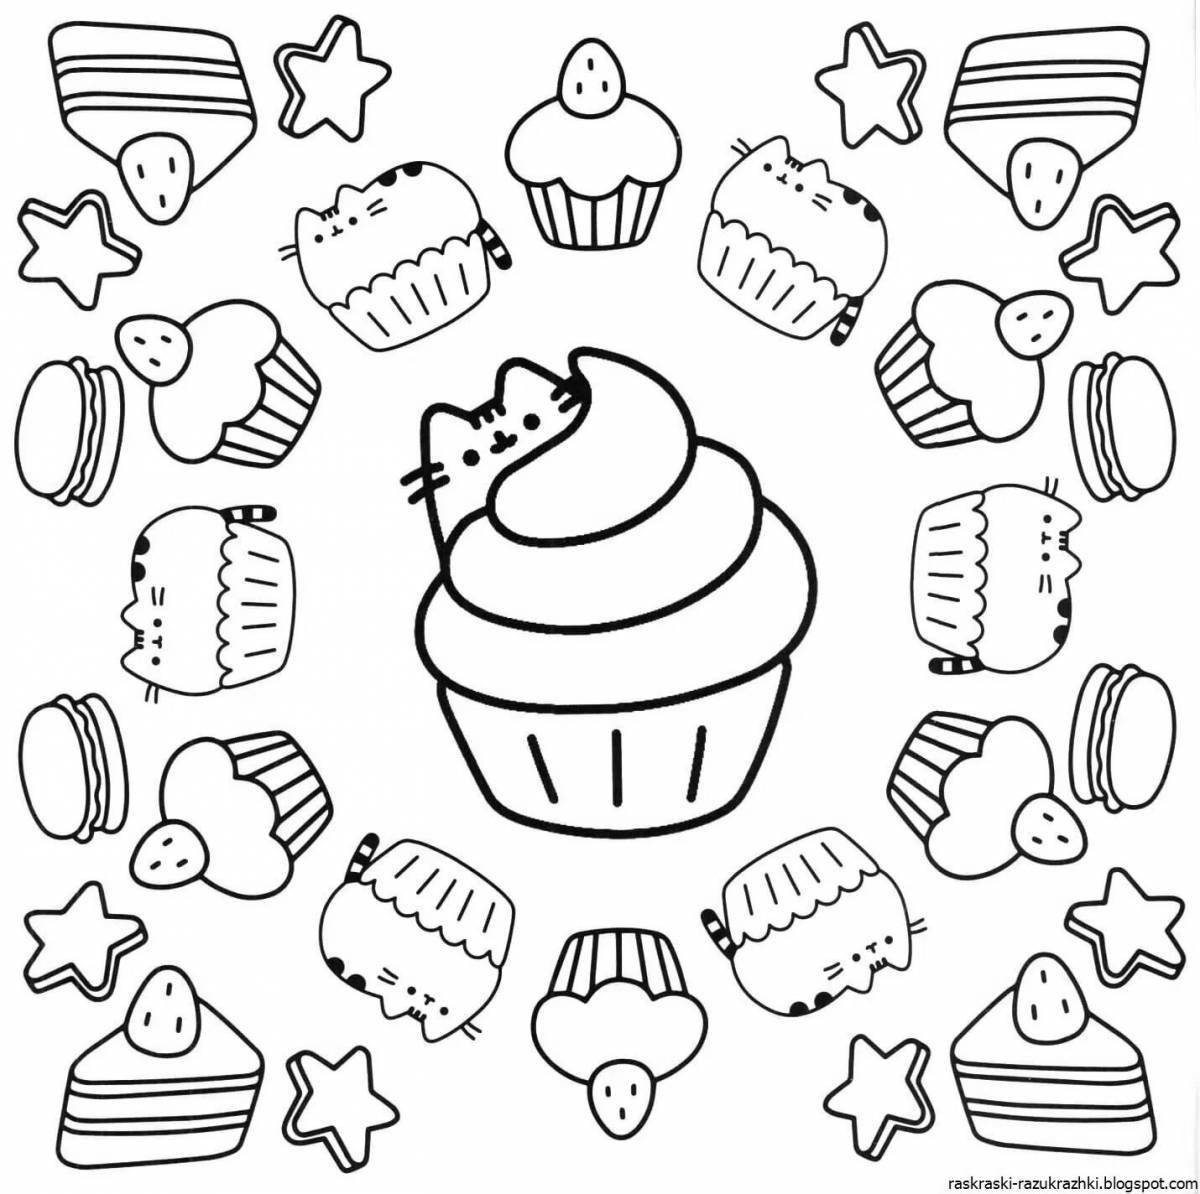 Outstanding pusheen coloring page